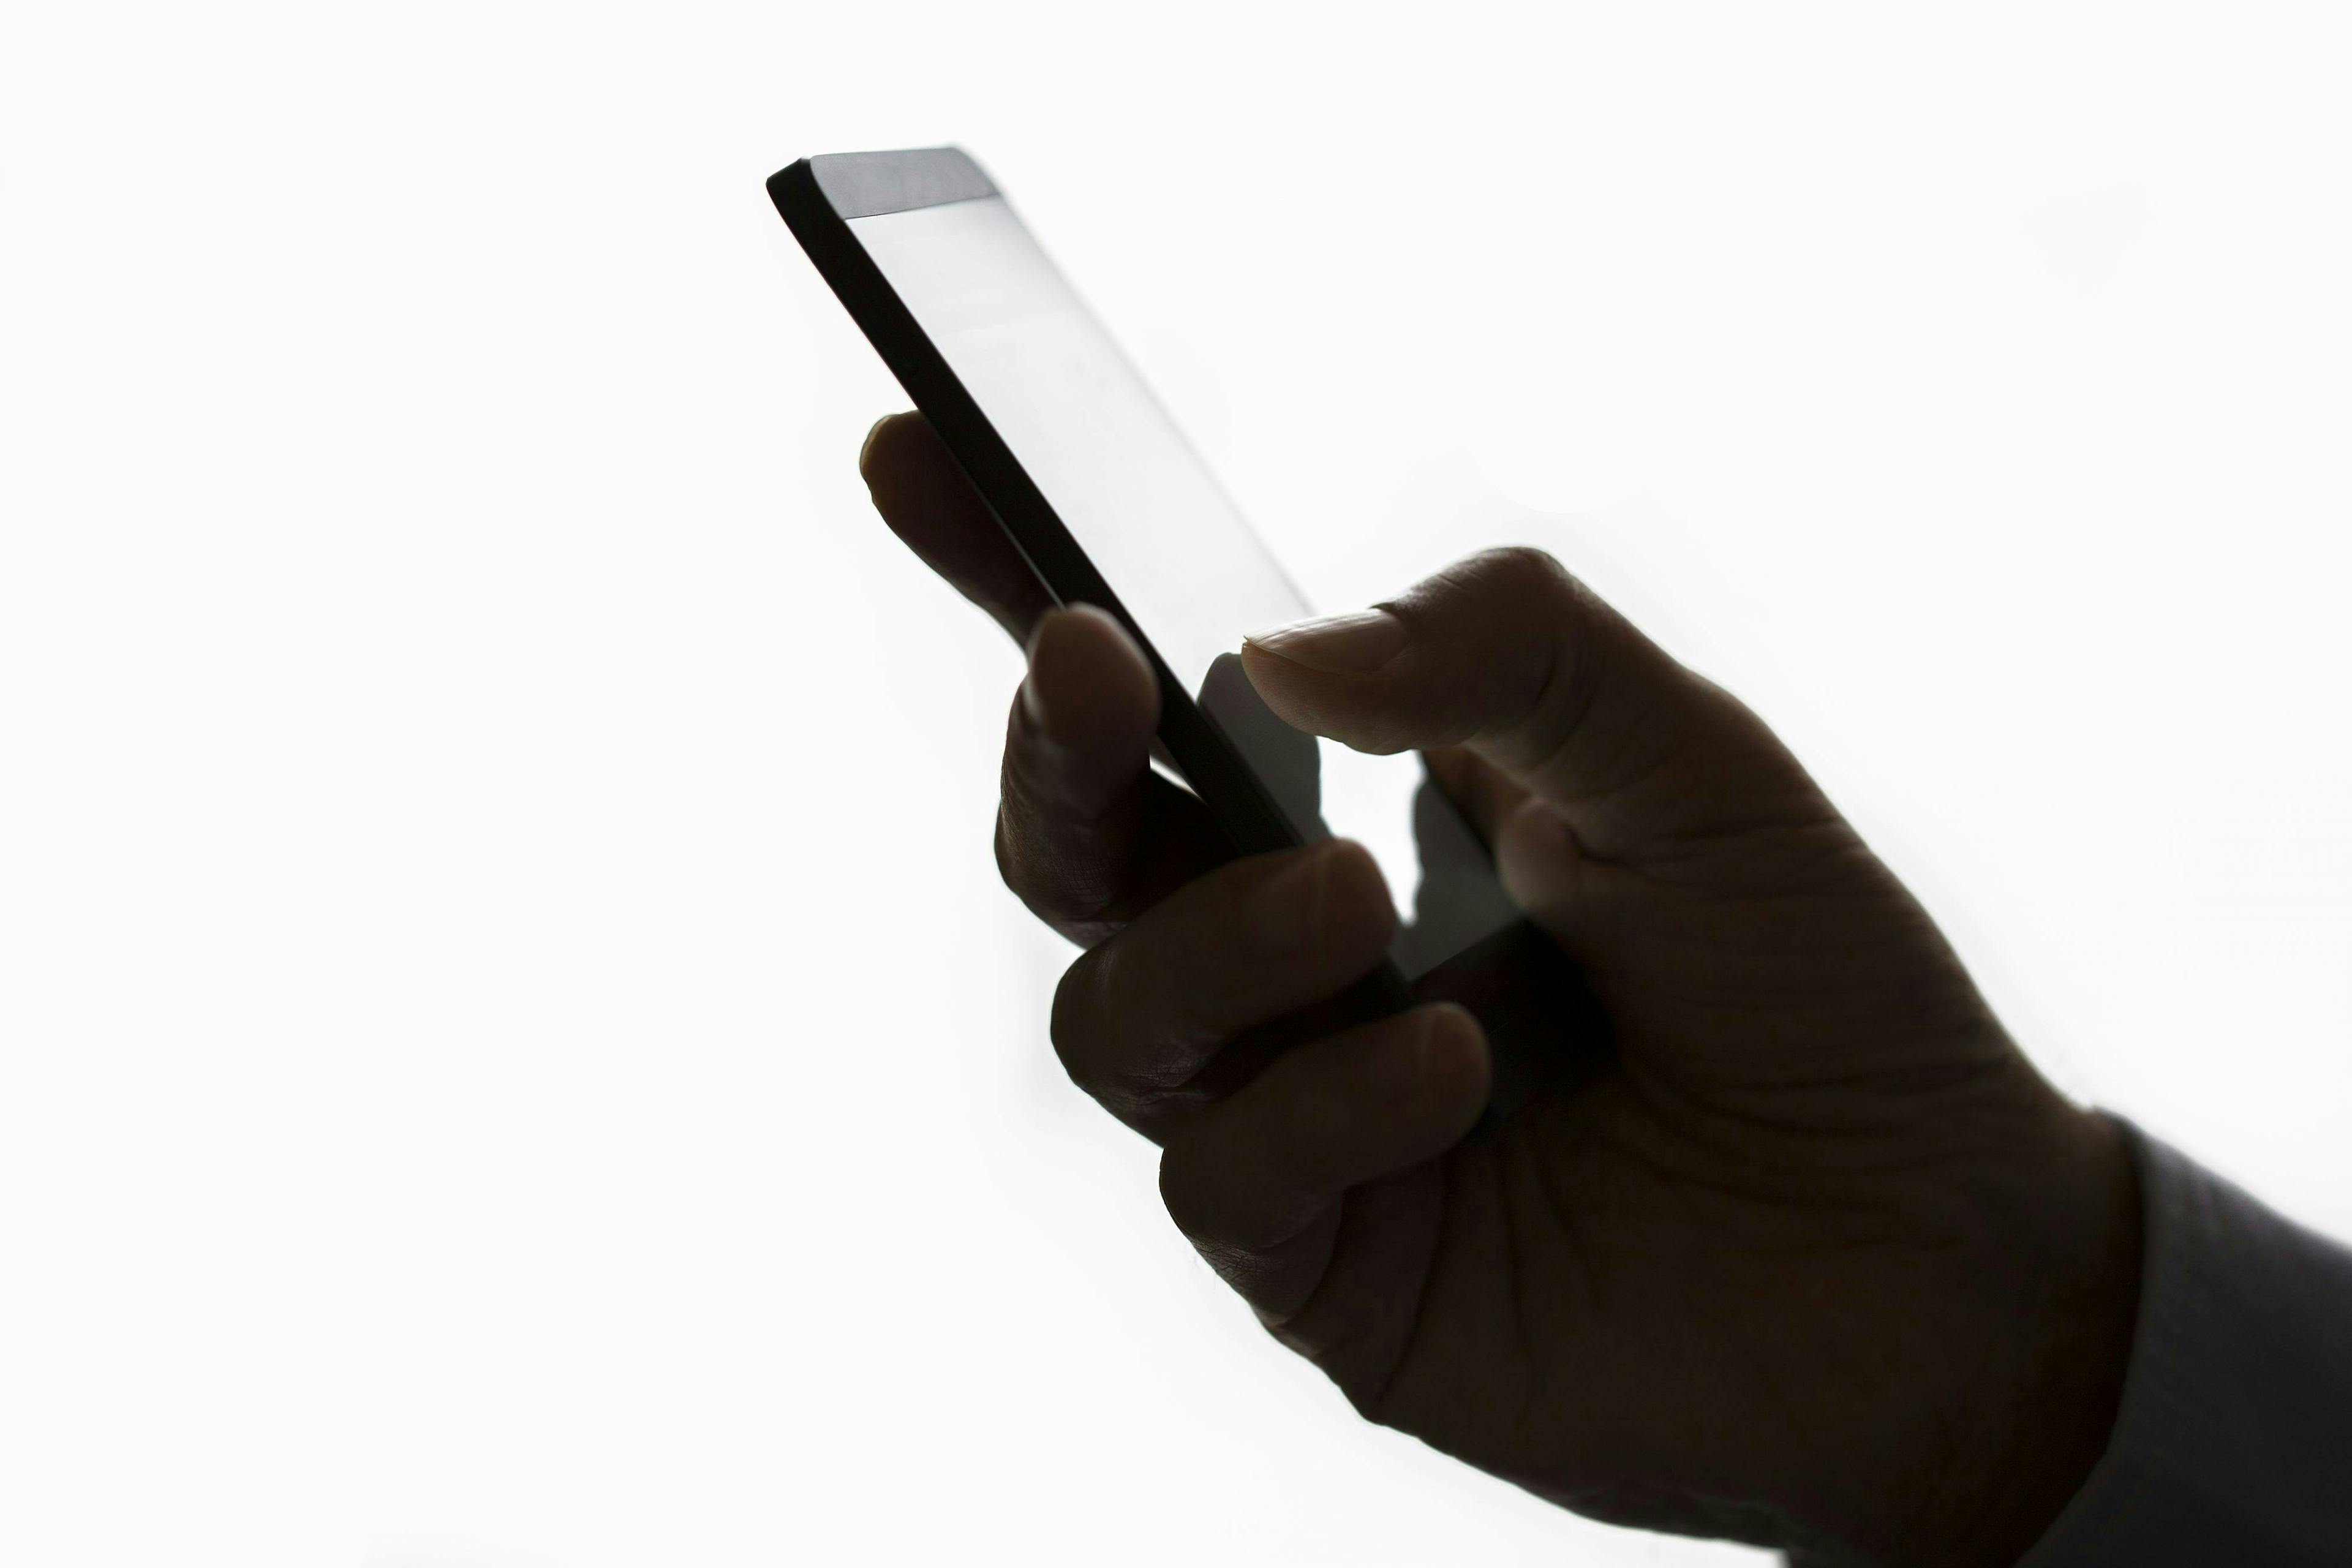 A hand holds a smartphone with fingers touching the screen, against a plain white background.